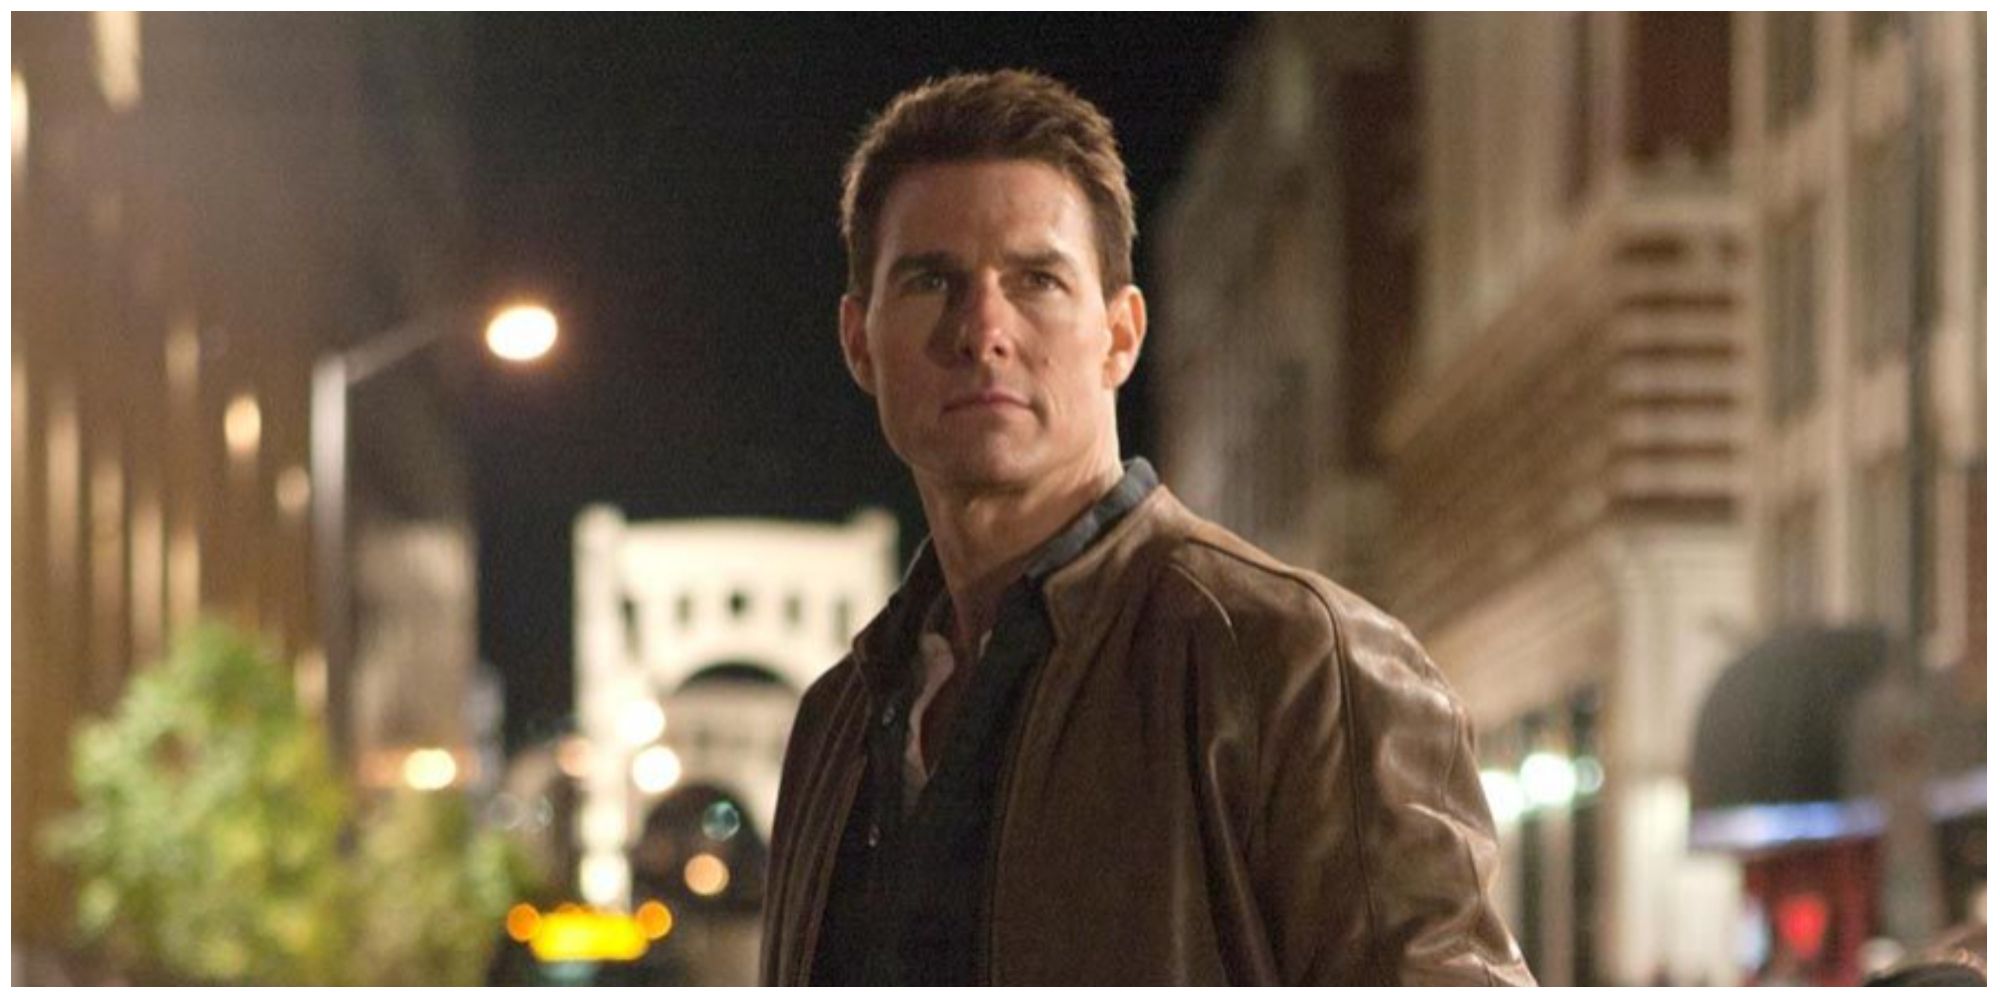 Tom Cruise as Jack Reacher standing in a street